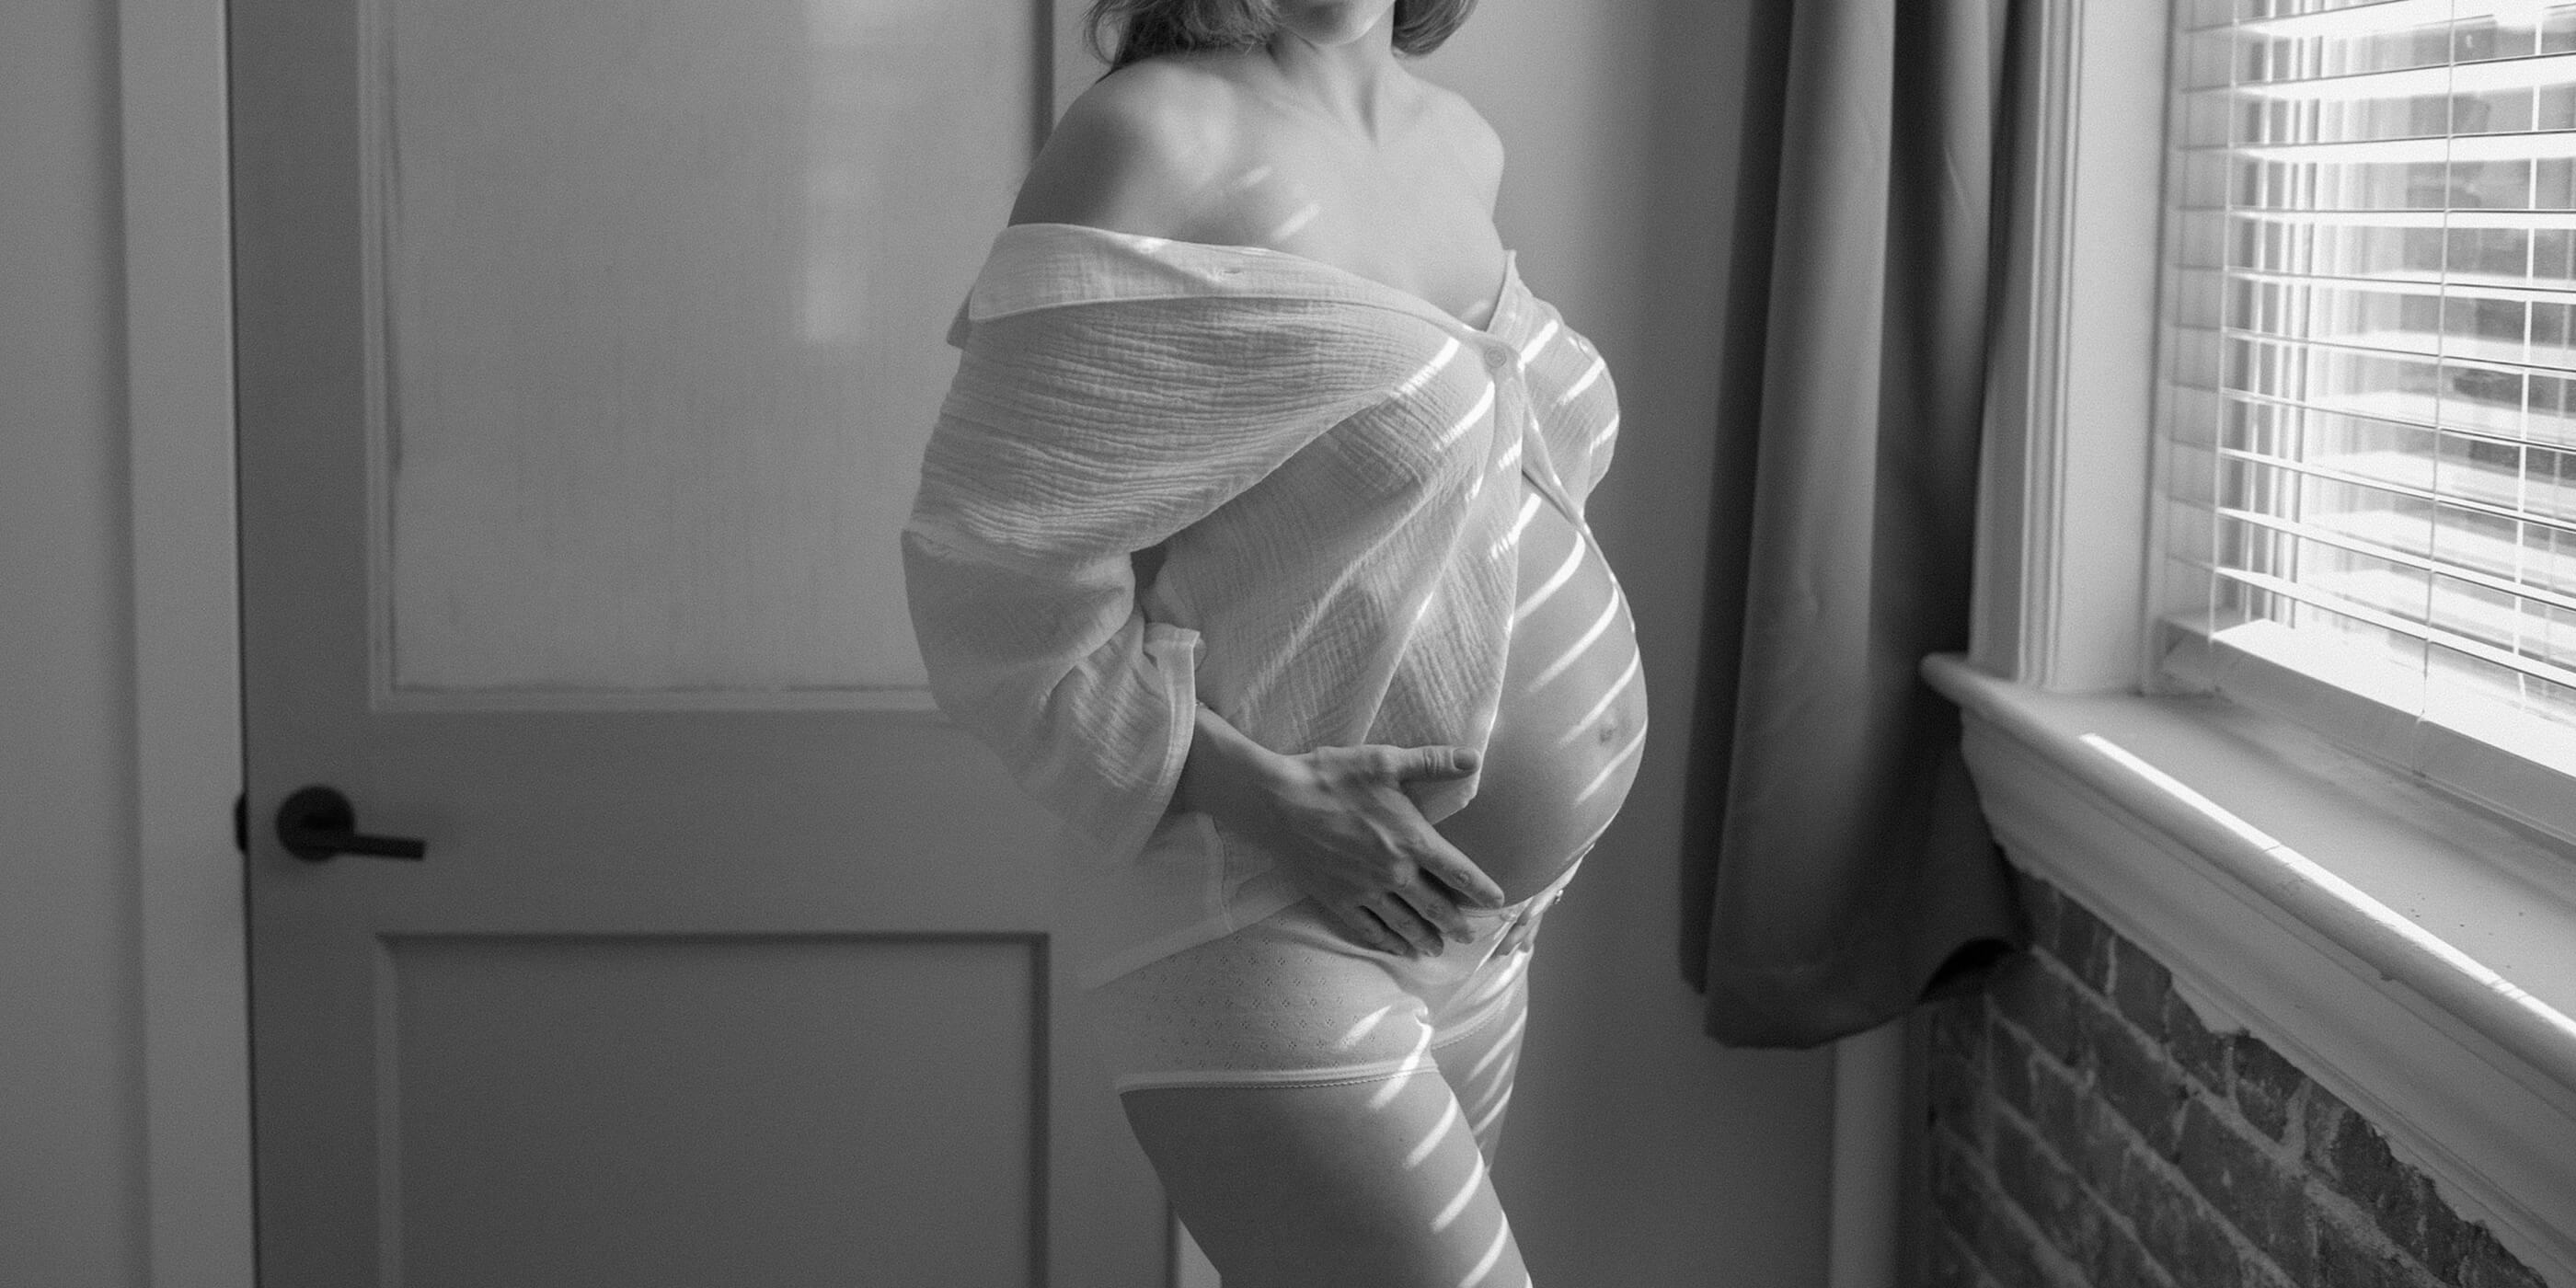 Maternity photography from Red Poppy in Reno, NV